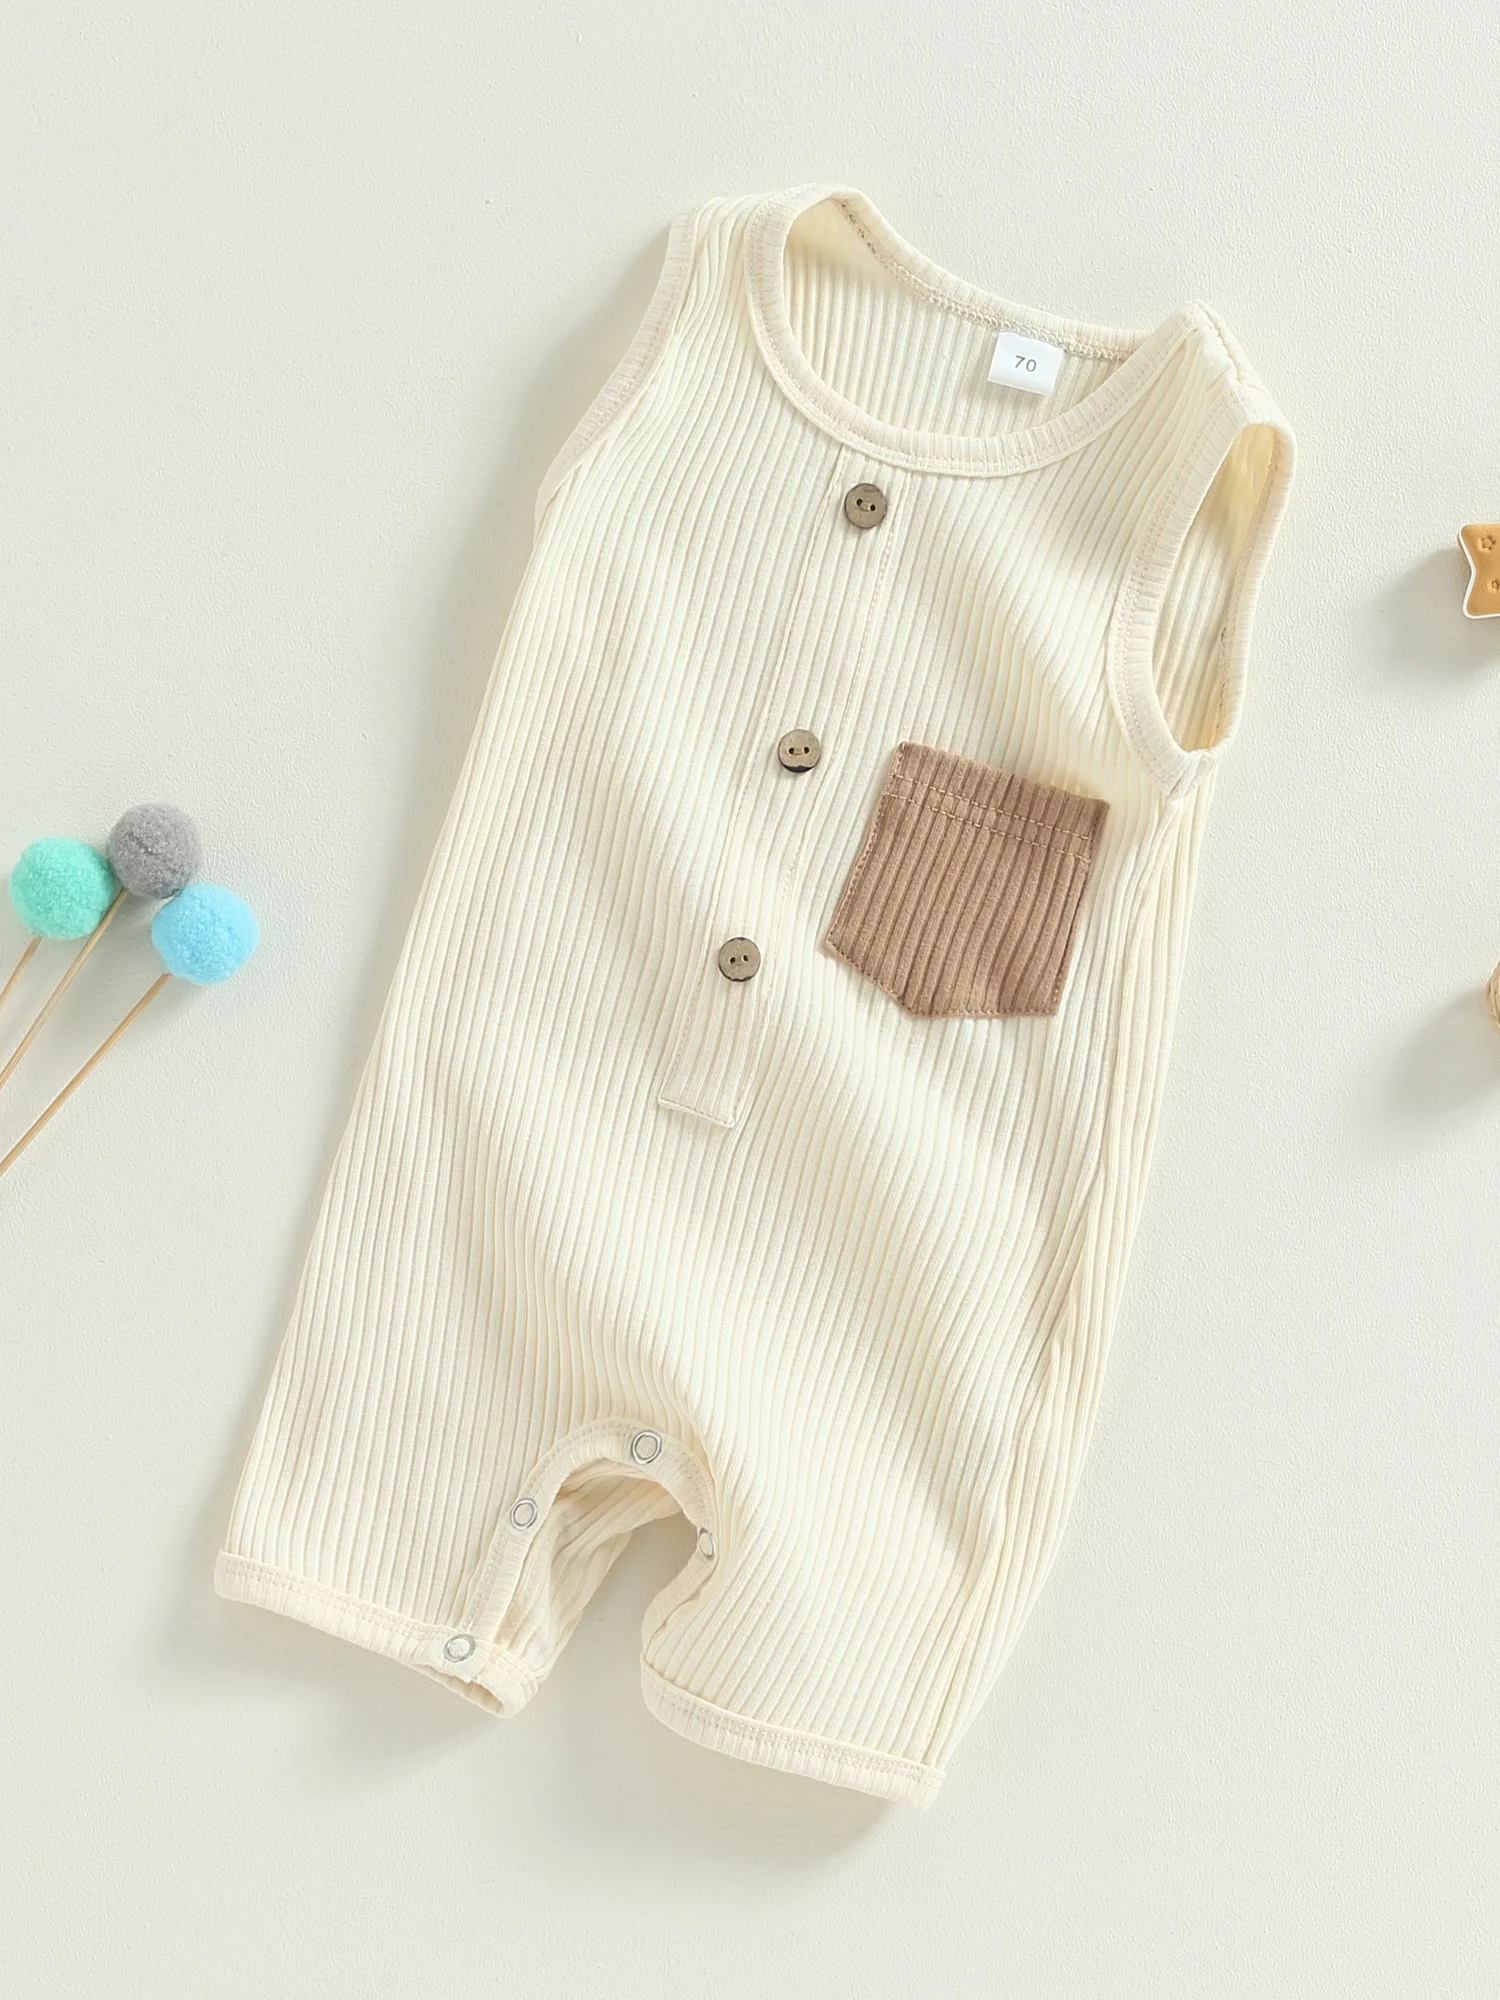 

Adorable Unisex Sleeveless Rib Knit Romper with Pocket - Perfect Summer Fall Outfit for Newborn Baby Boy or Girl